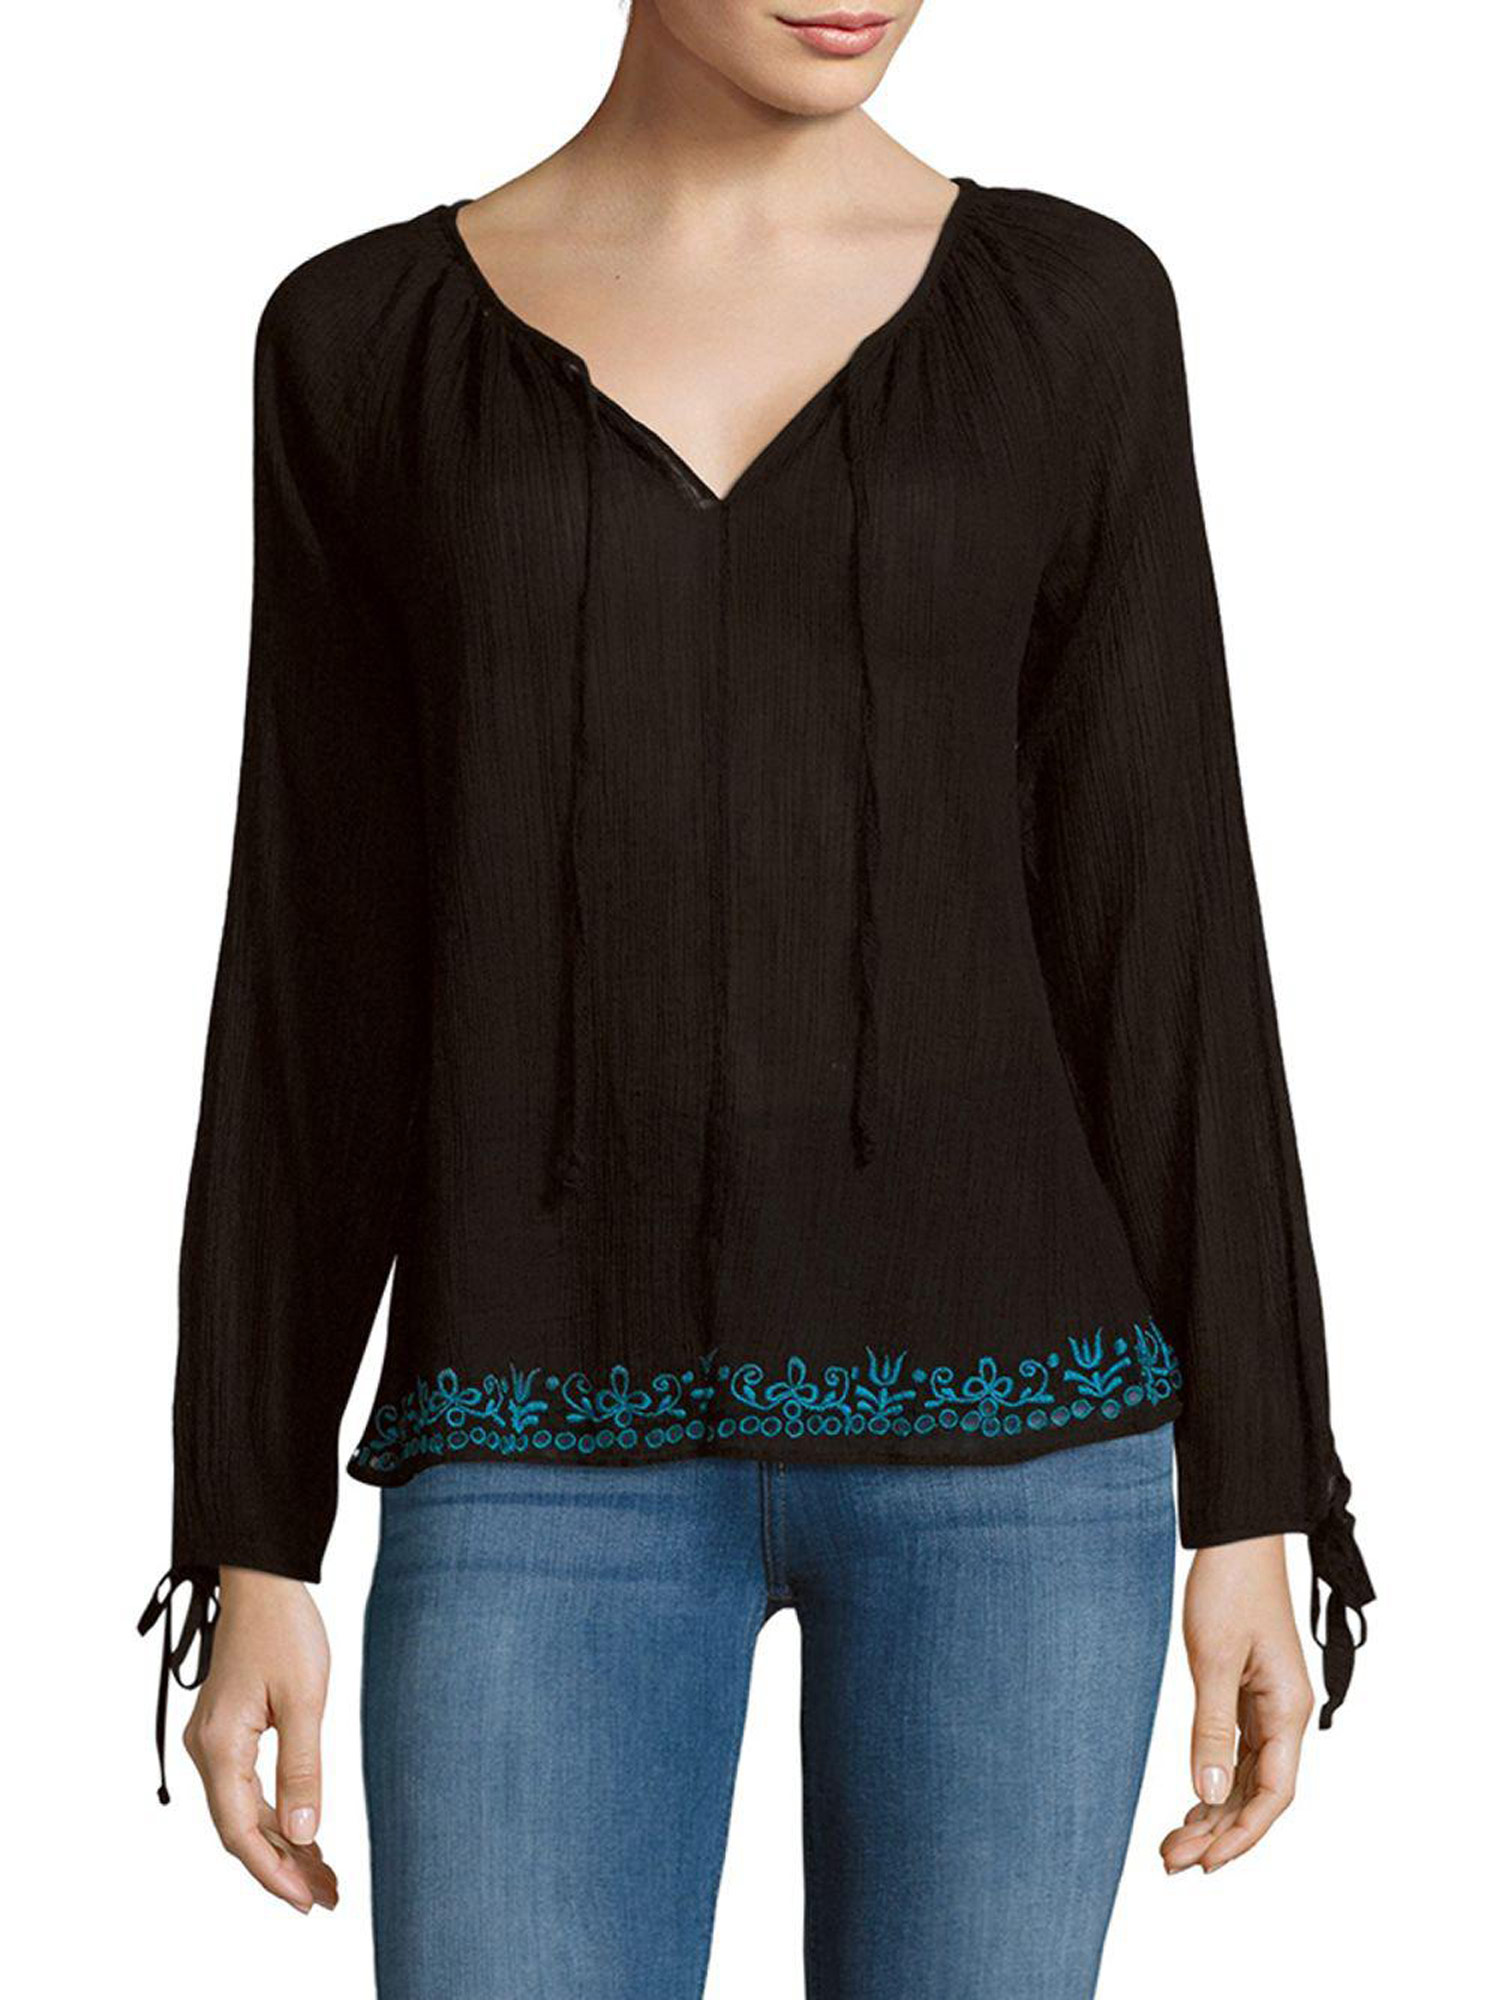 LOVESHACKFANCY Women's Black Solid Embroidered Peasant Blouse $285 NWT ...